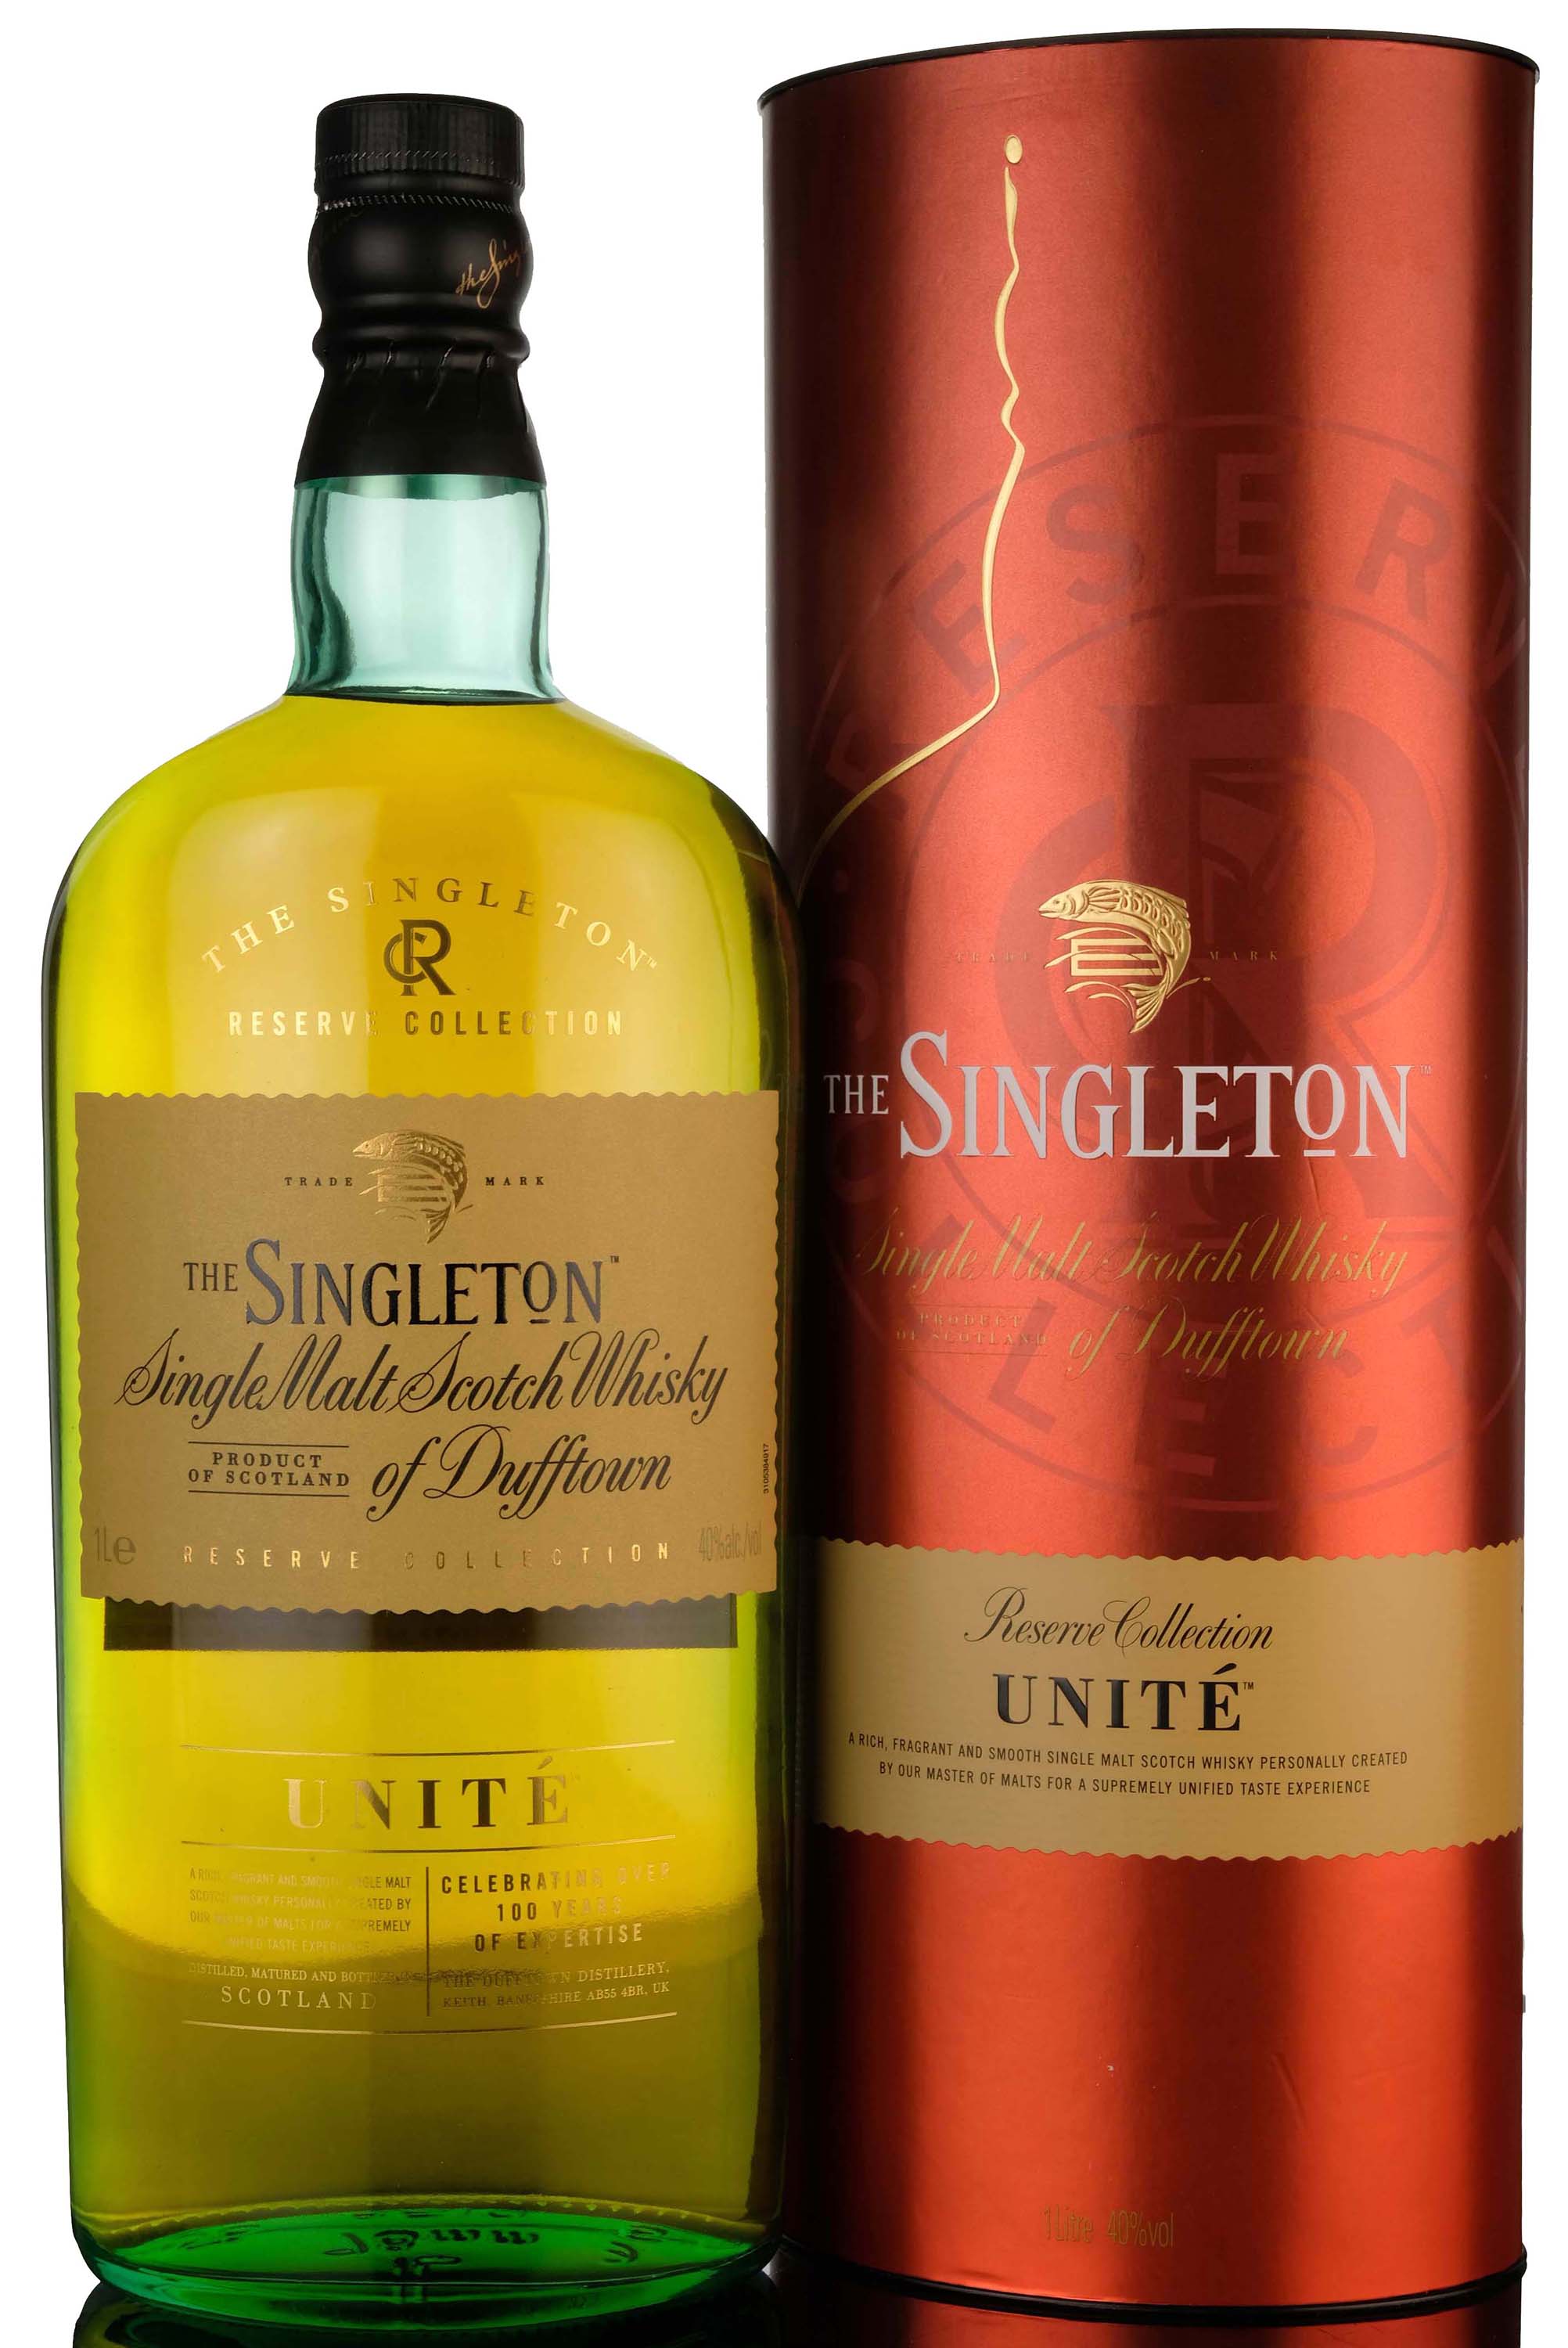 Dufftown Reserve Collection - Unite - 2013 Released - 1 Litre